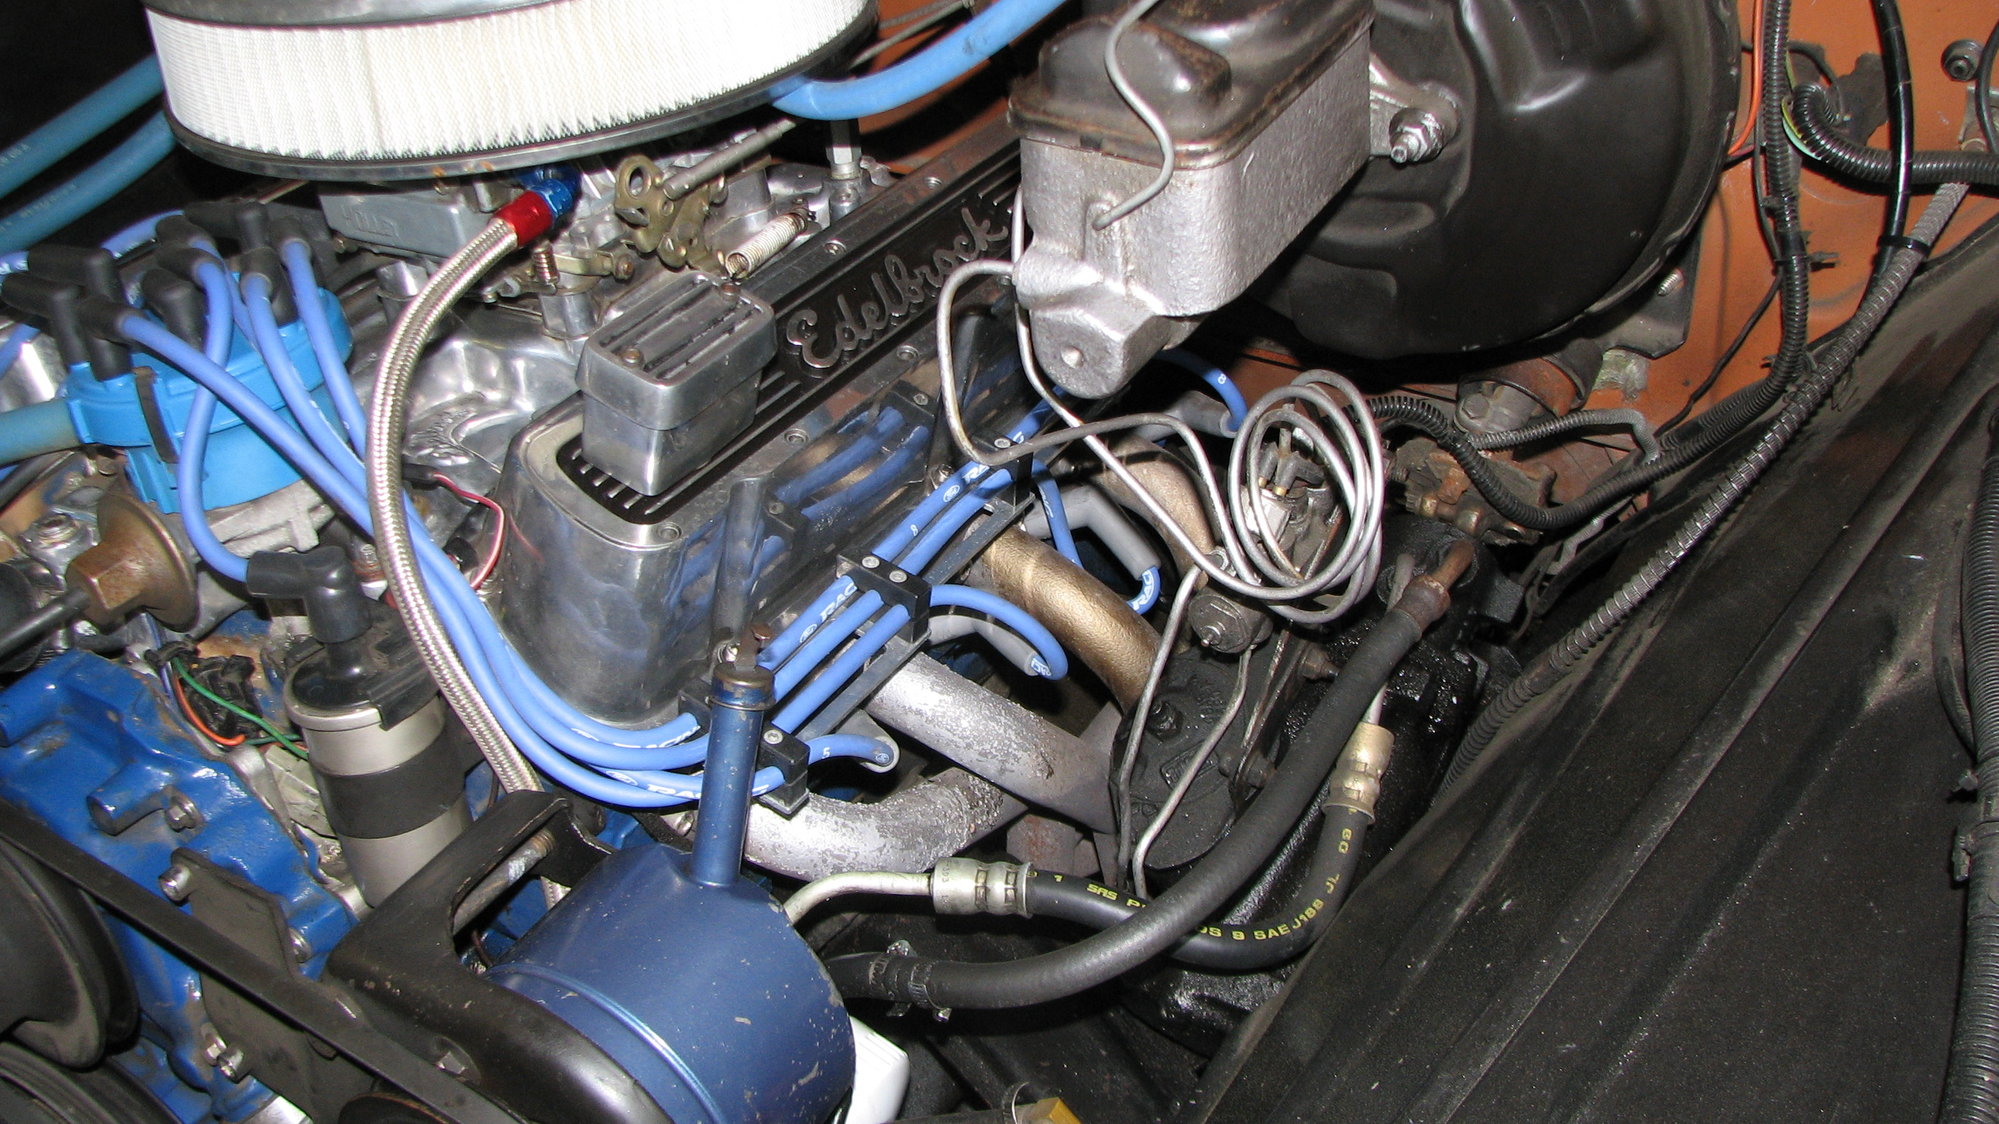 Power steering pump choices for 302 - Ford Truck Enthusiasts Forums